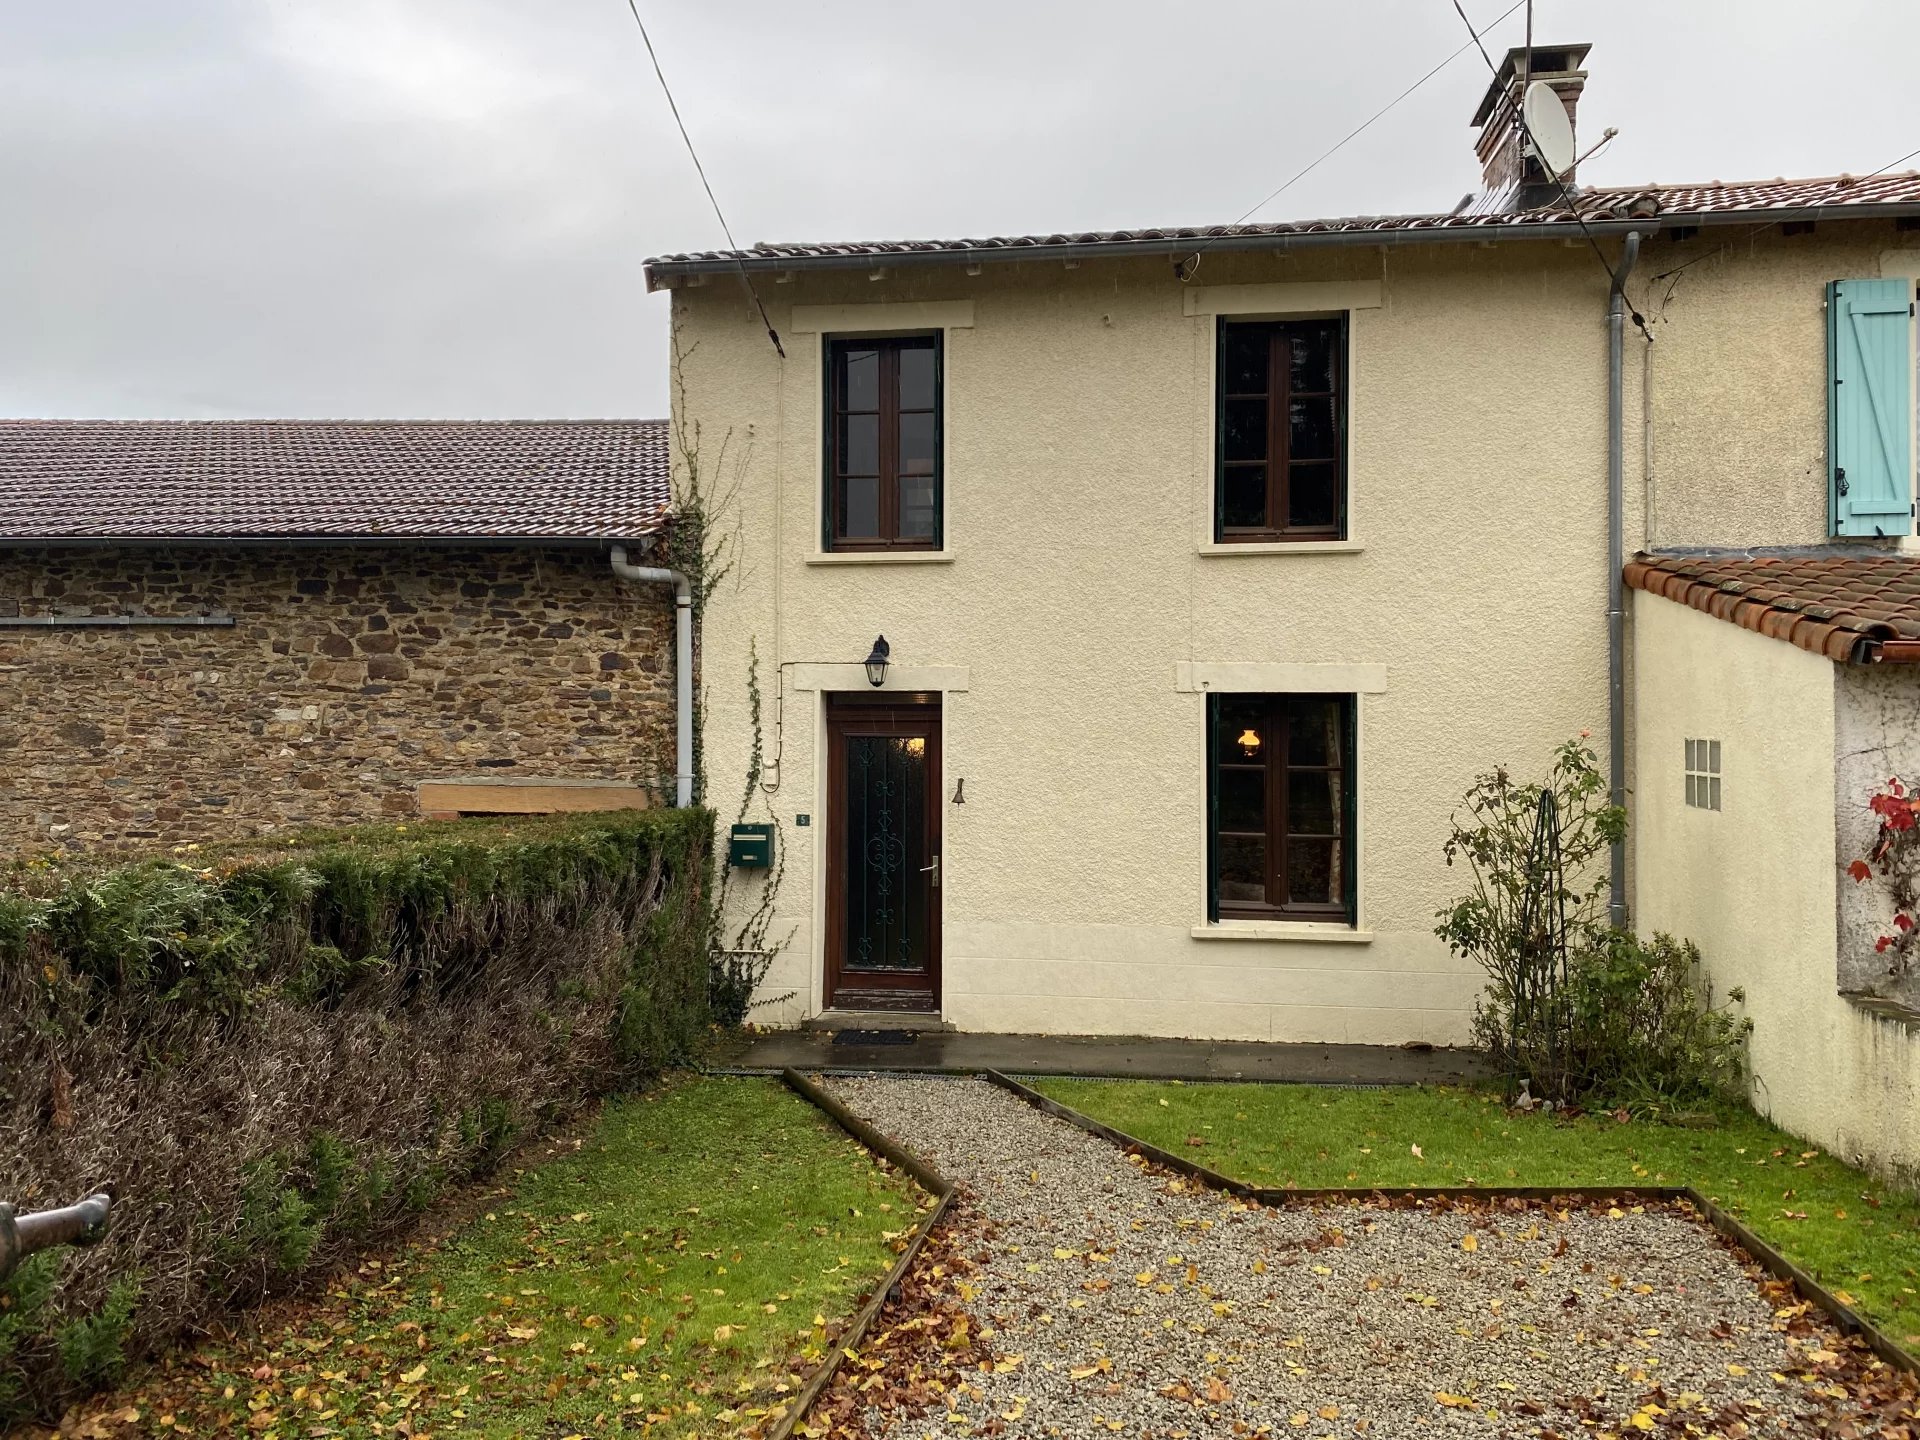 A really lovely 2 bedroom, 2 bathroom house in small hamlet (10 min walk to small town)